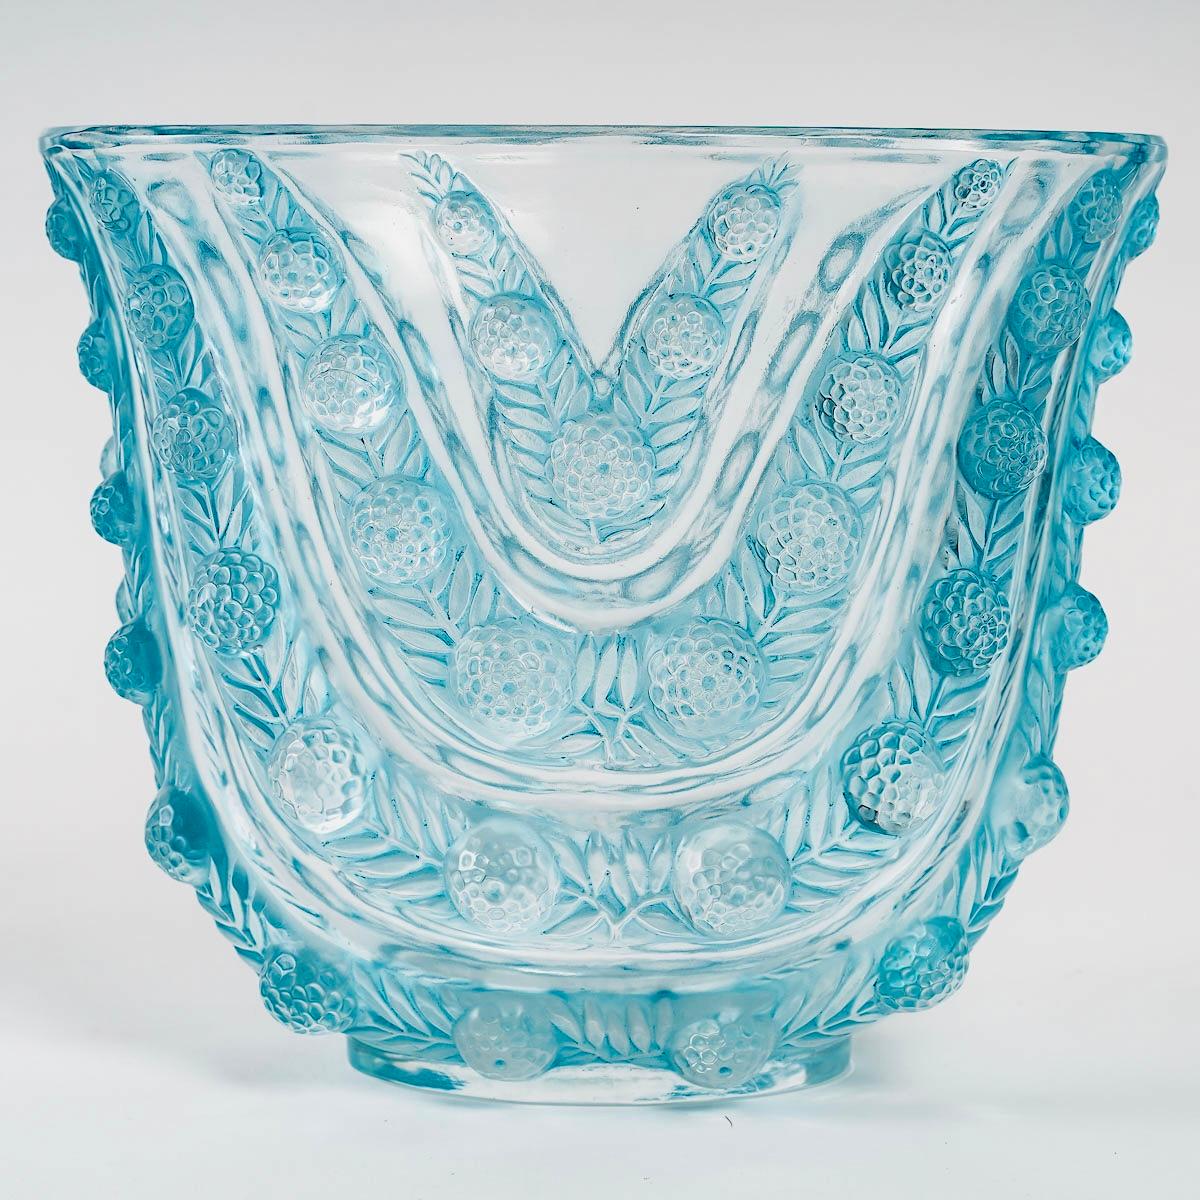 Molded 1937 René Lalique Vichy Vase in Glass with Blue Patina, Flowers